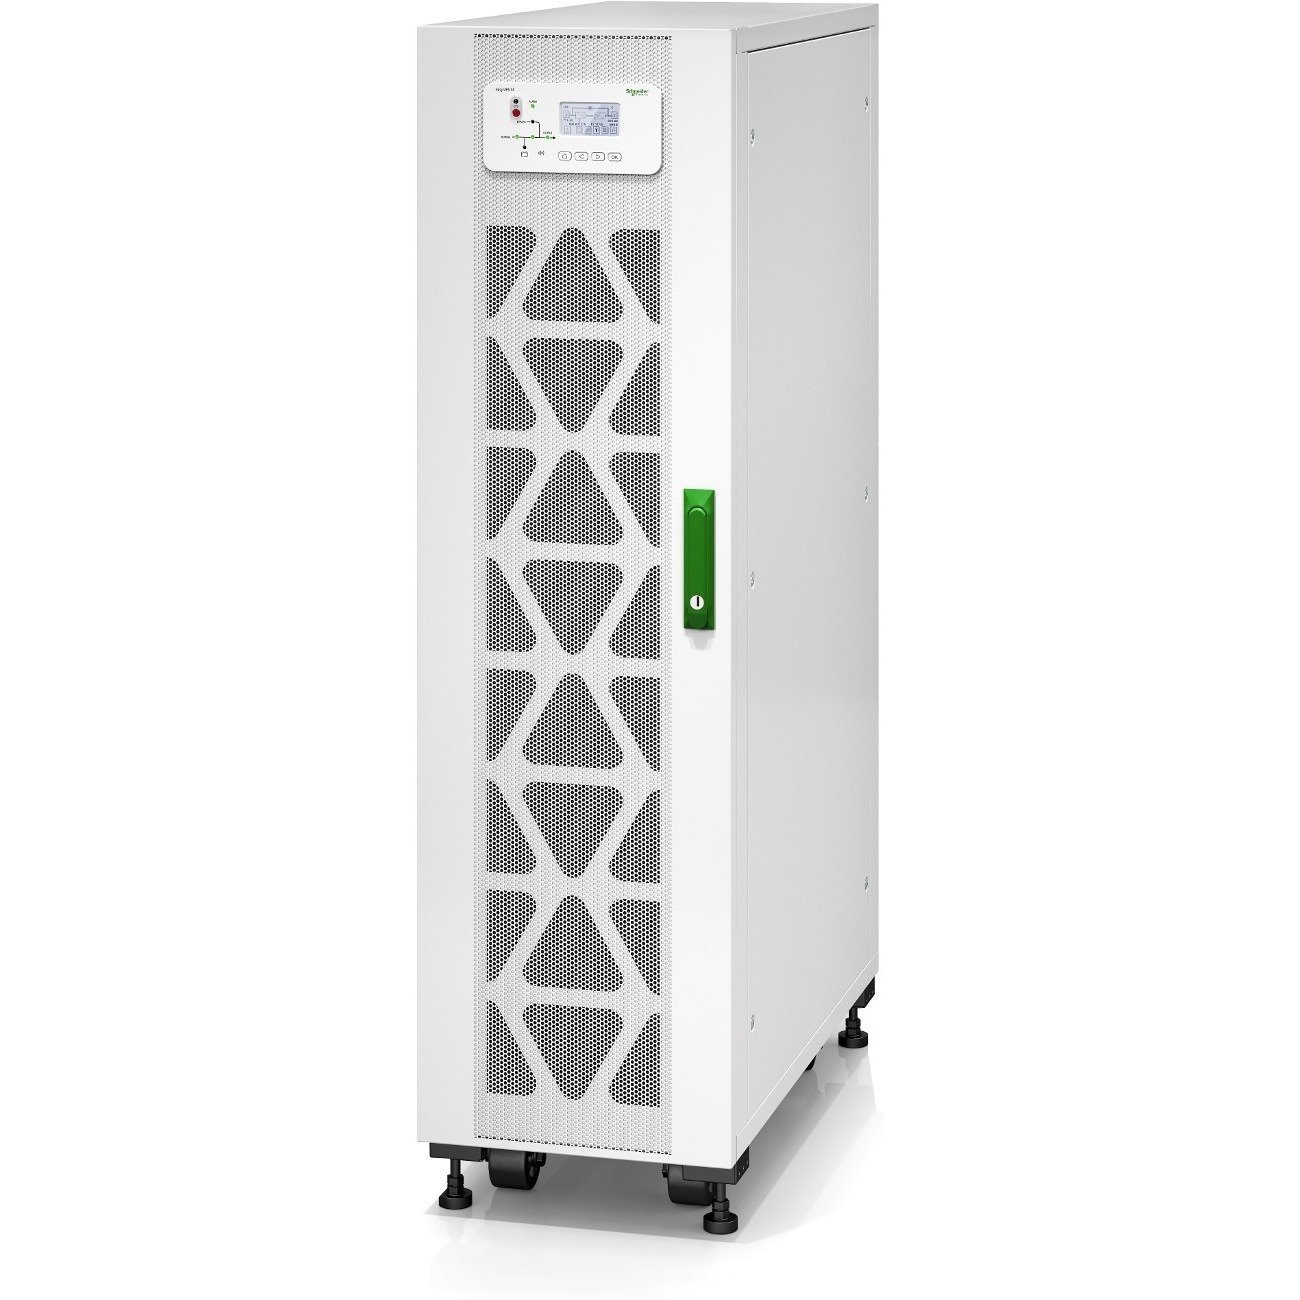 Schneider Electric Easy UPS 3S Double Conversion Online UPS - 15 kVA/15 kW - Three Phase